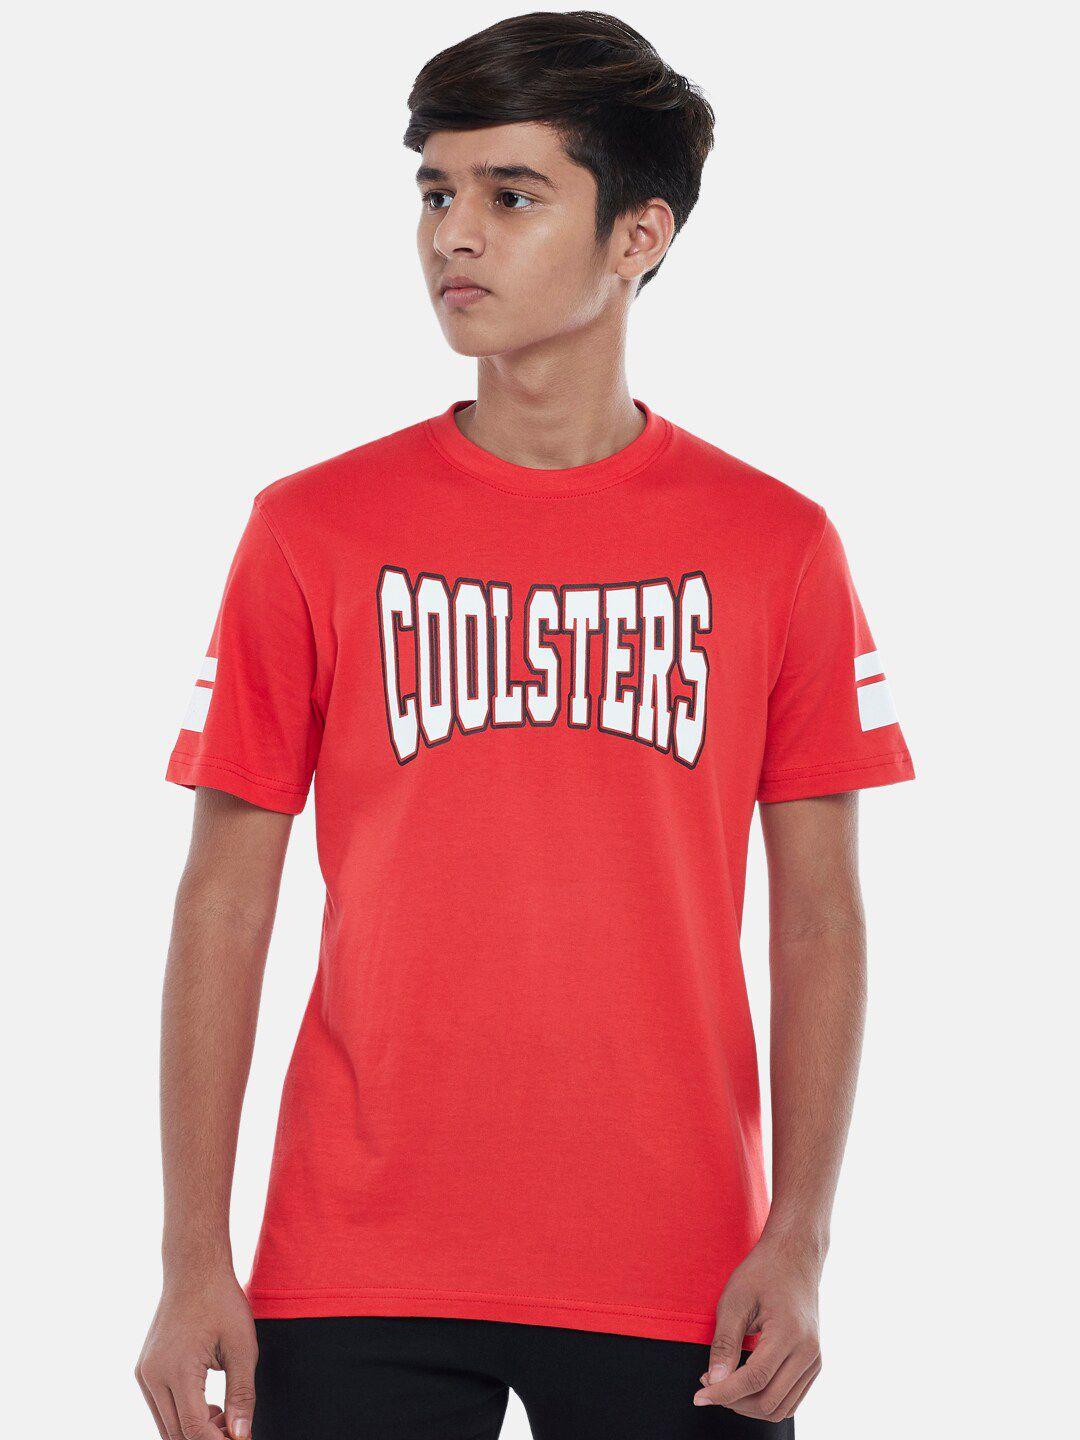 coolsters by pantaloons boys red printed t-shirt